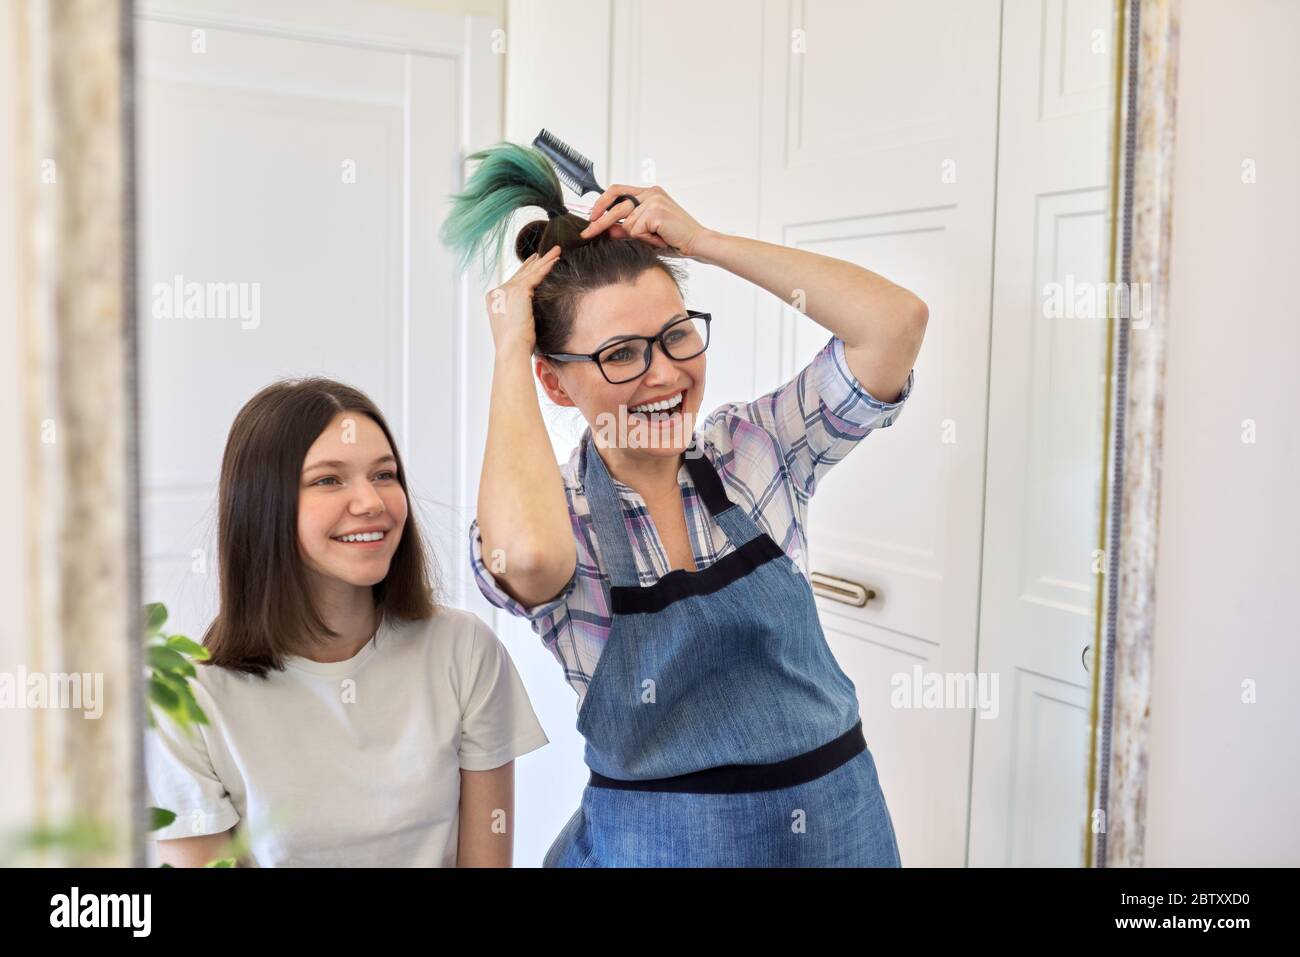 Haircut at home, mom cuts daughters hair, mother shows cut colored hair  Stock Photo - Alamy